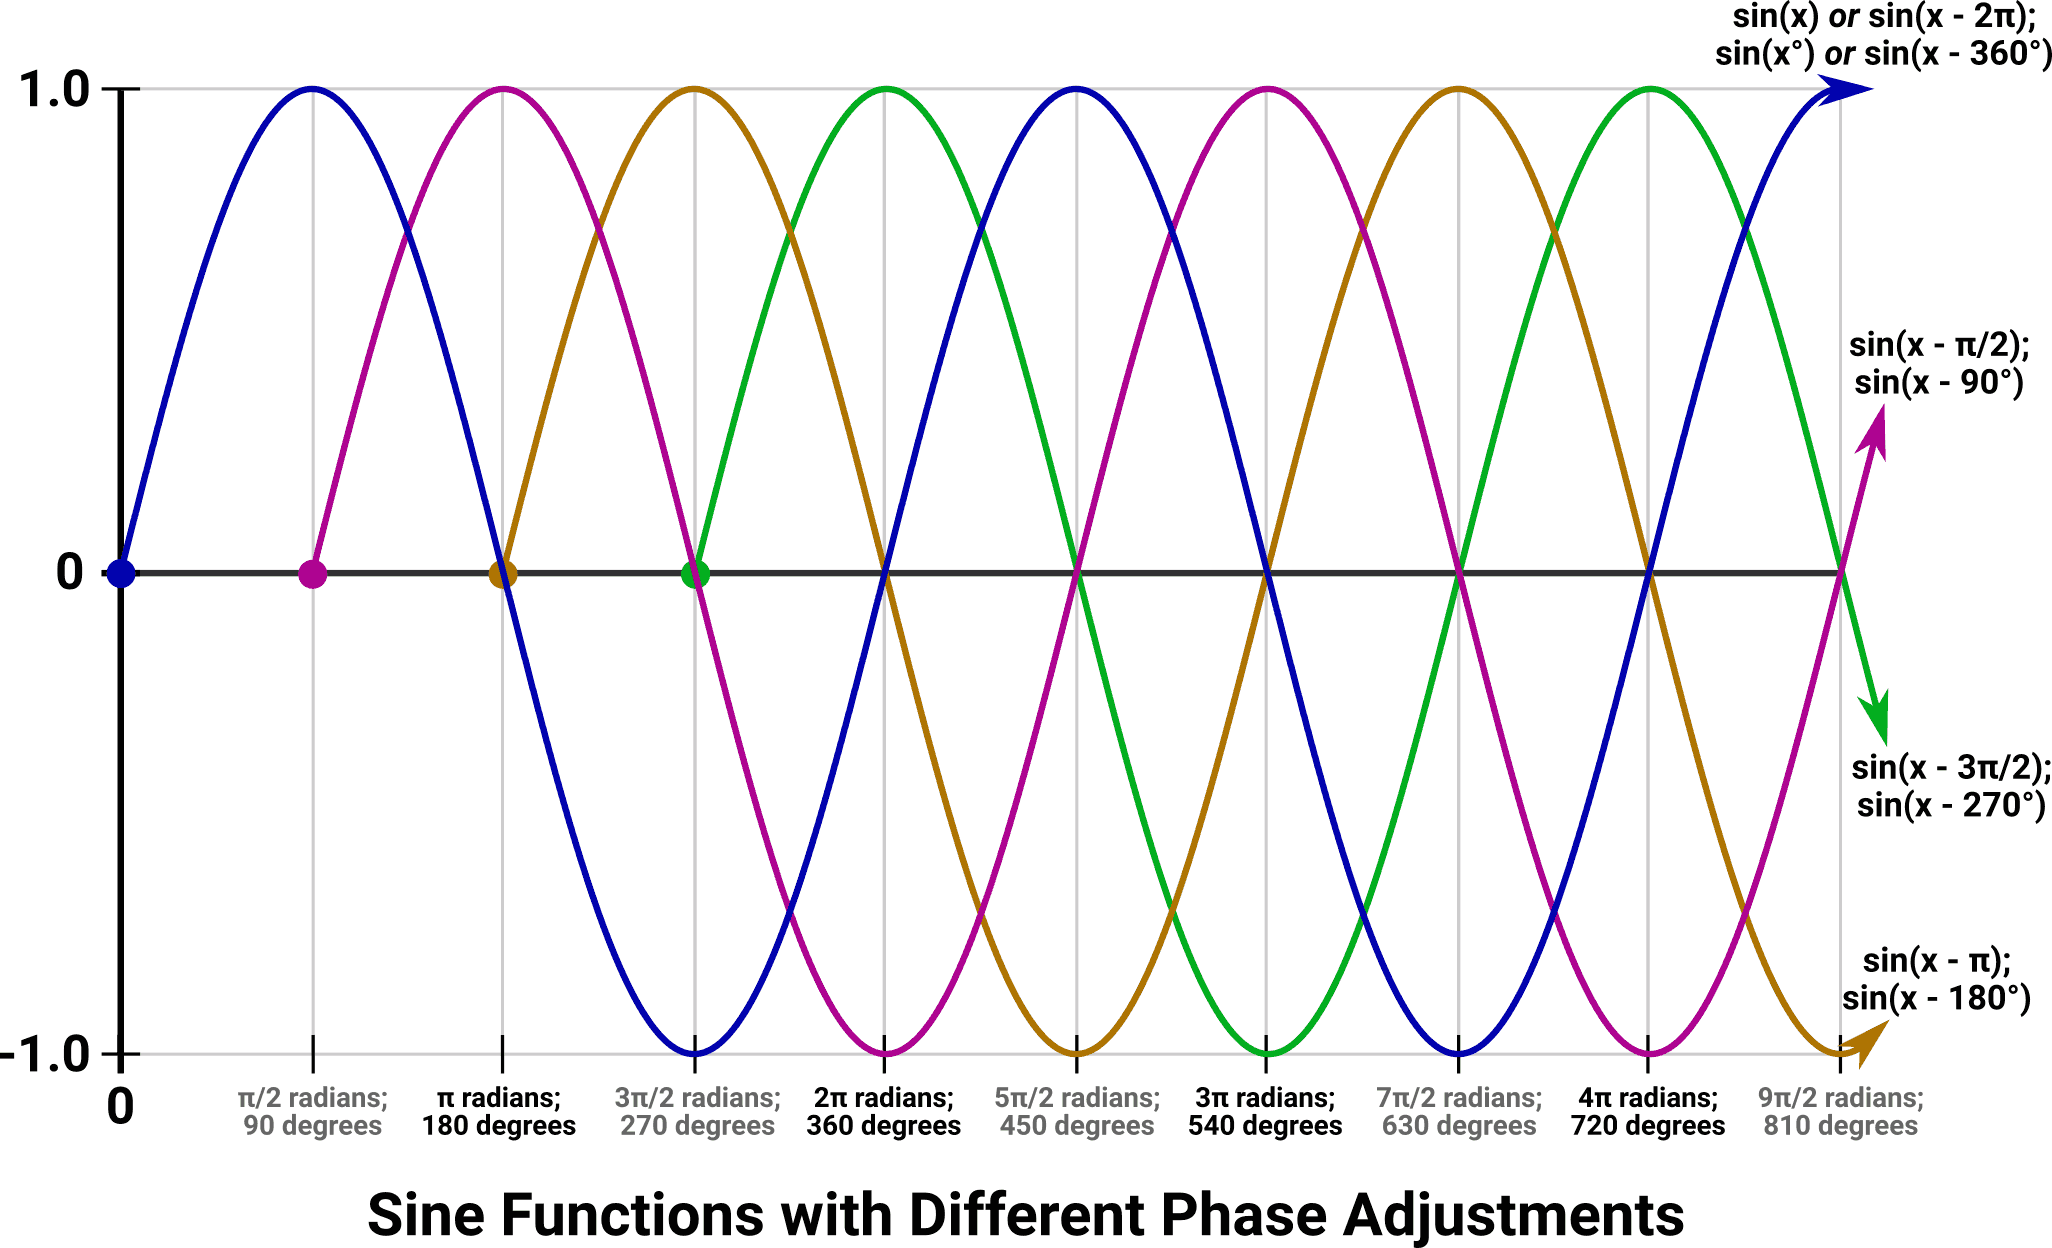 Examples of different phase adjustments applied to sine functions.